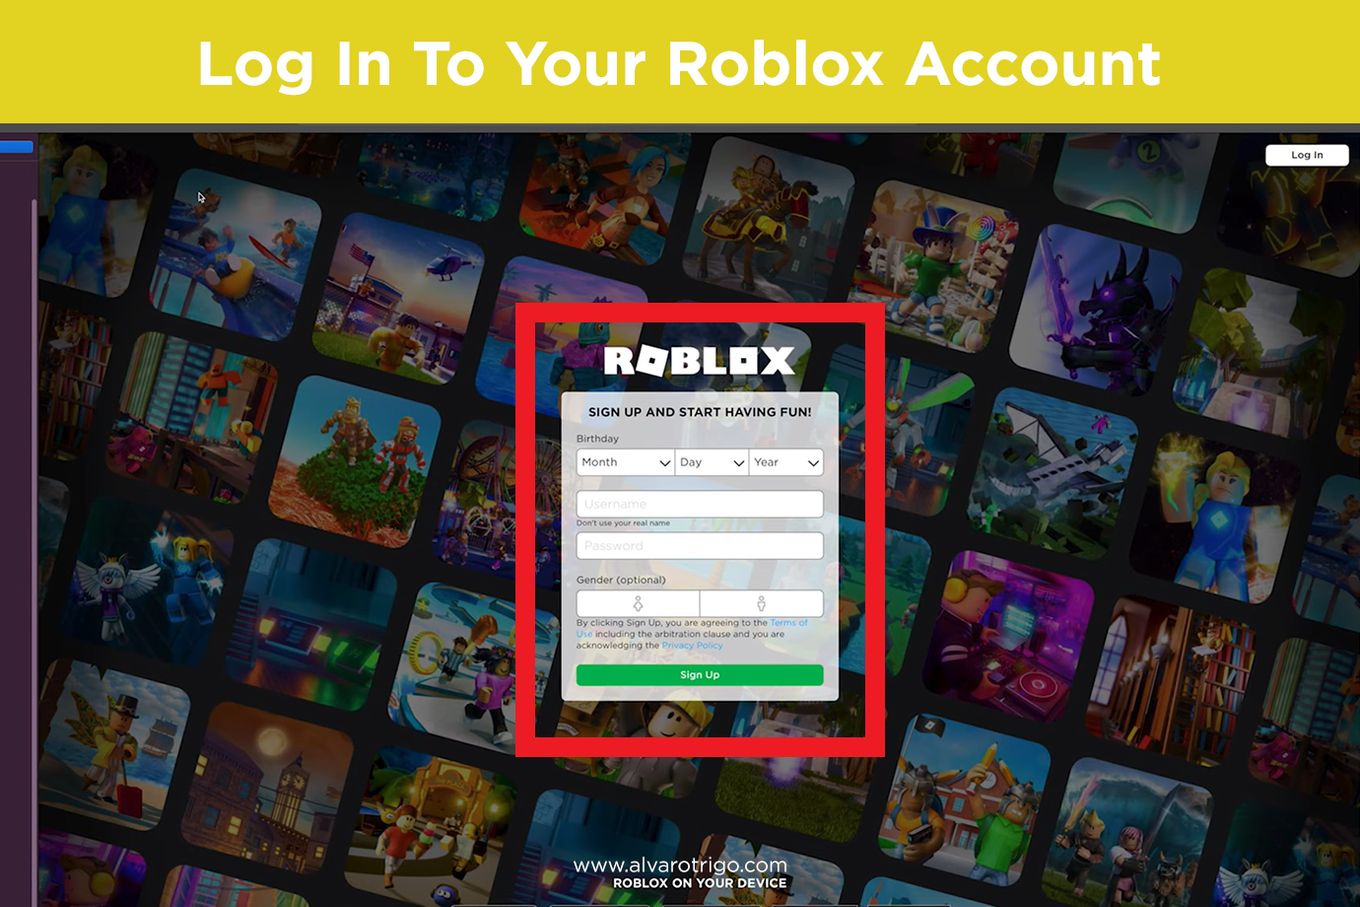 Log-in to your Roblox account